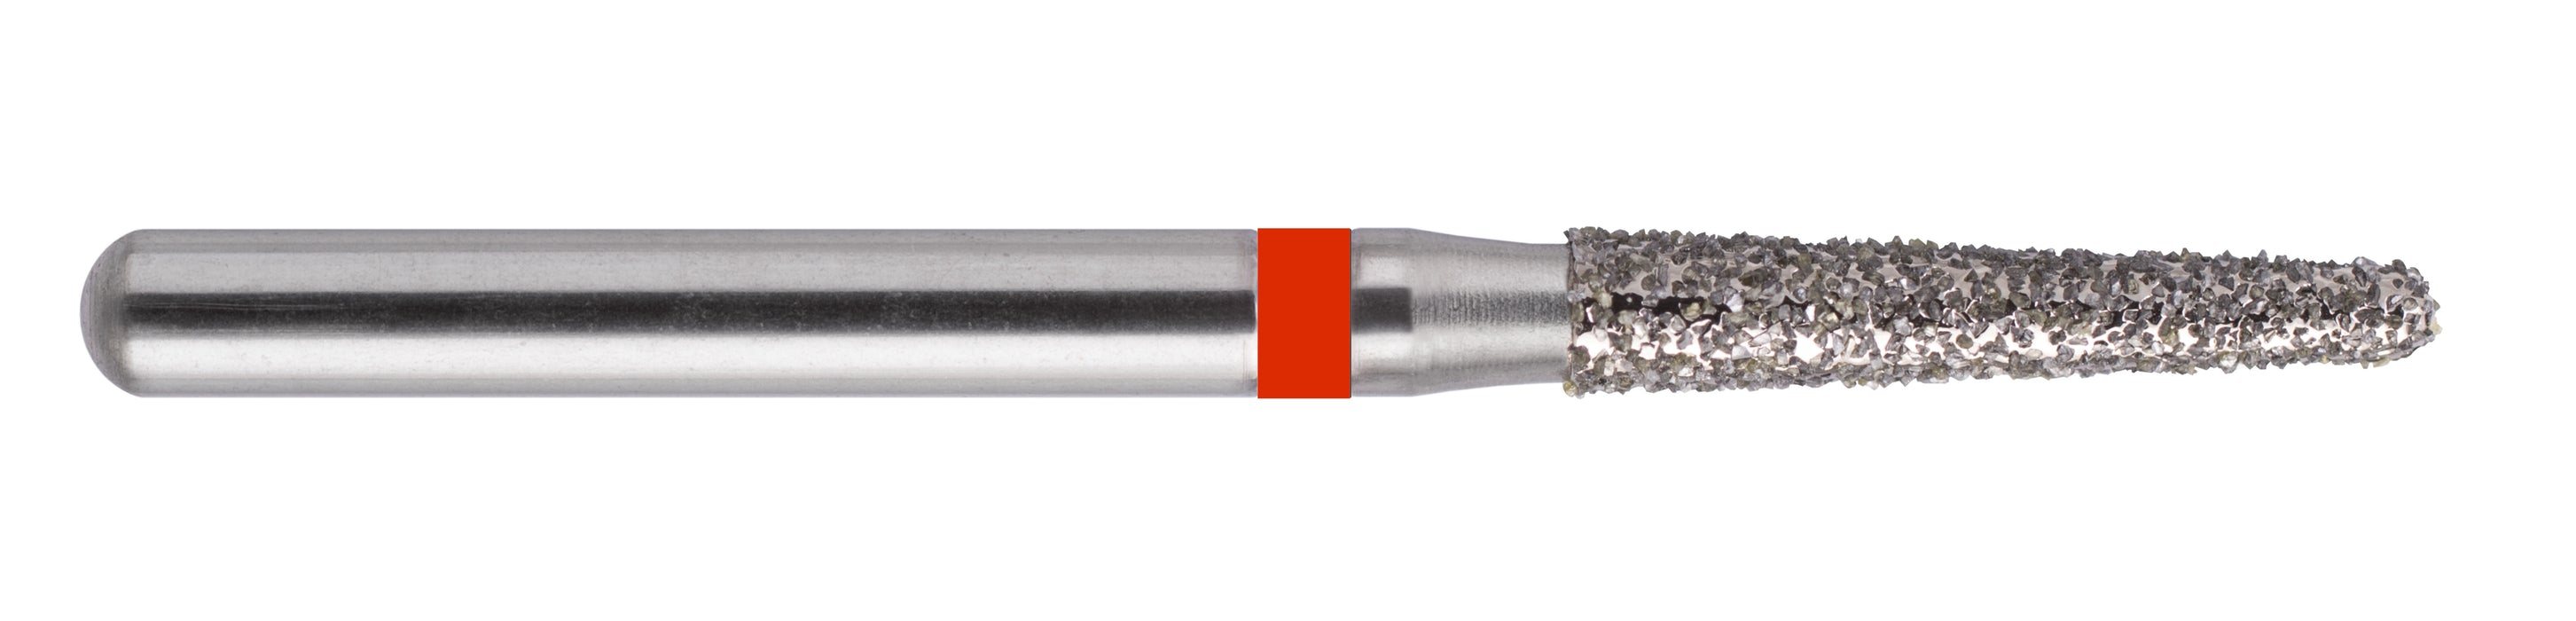 856S - Cone with rounded tip